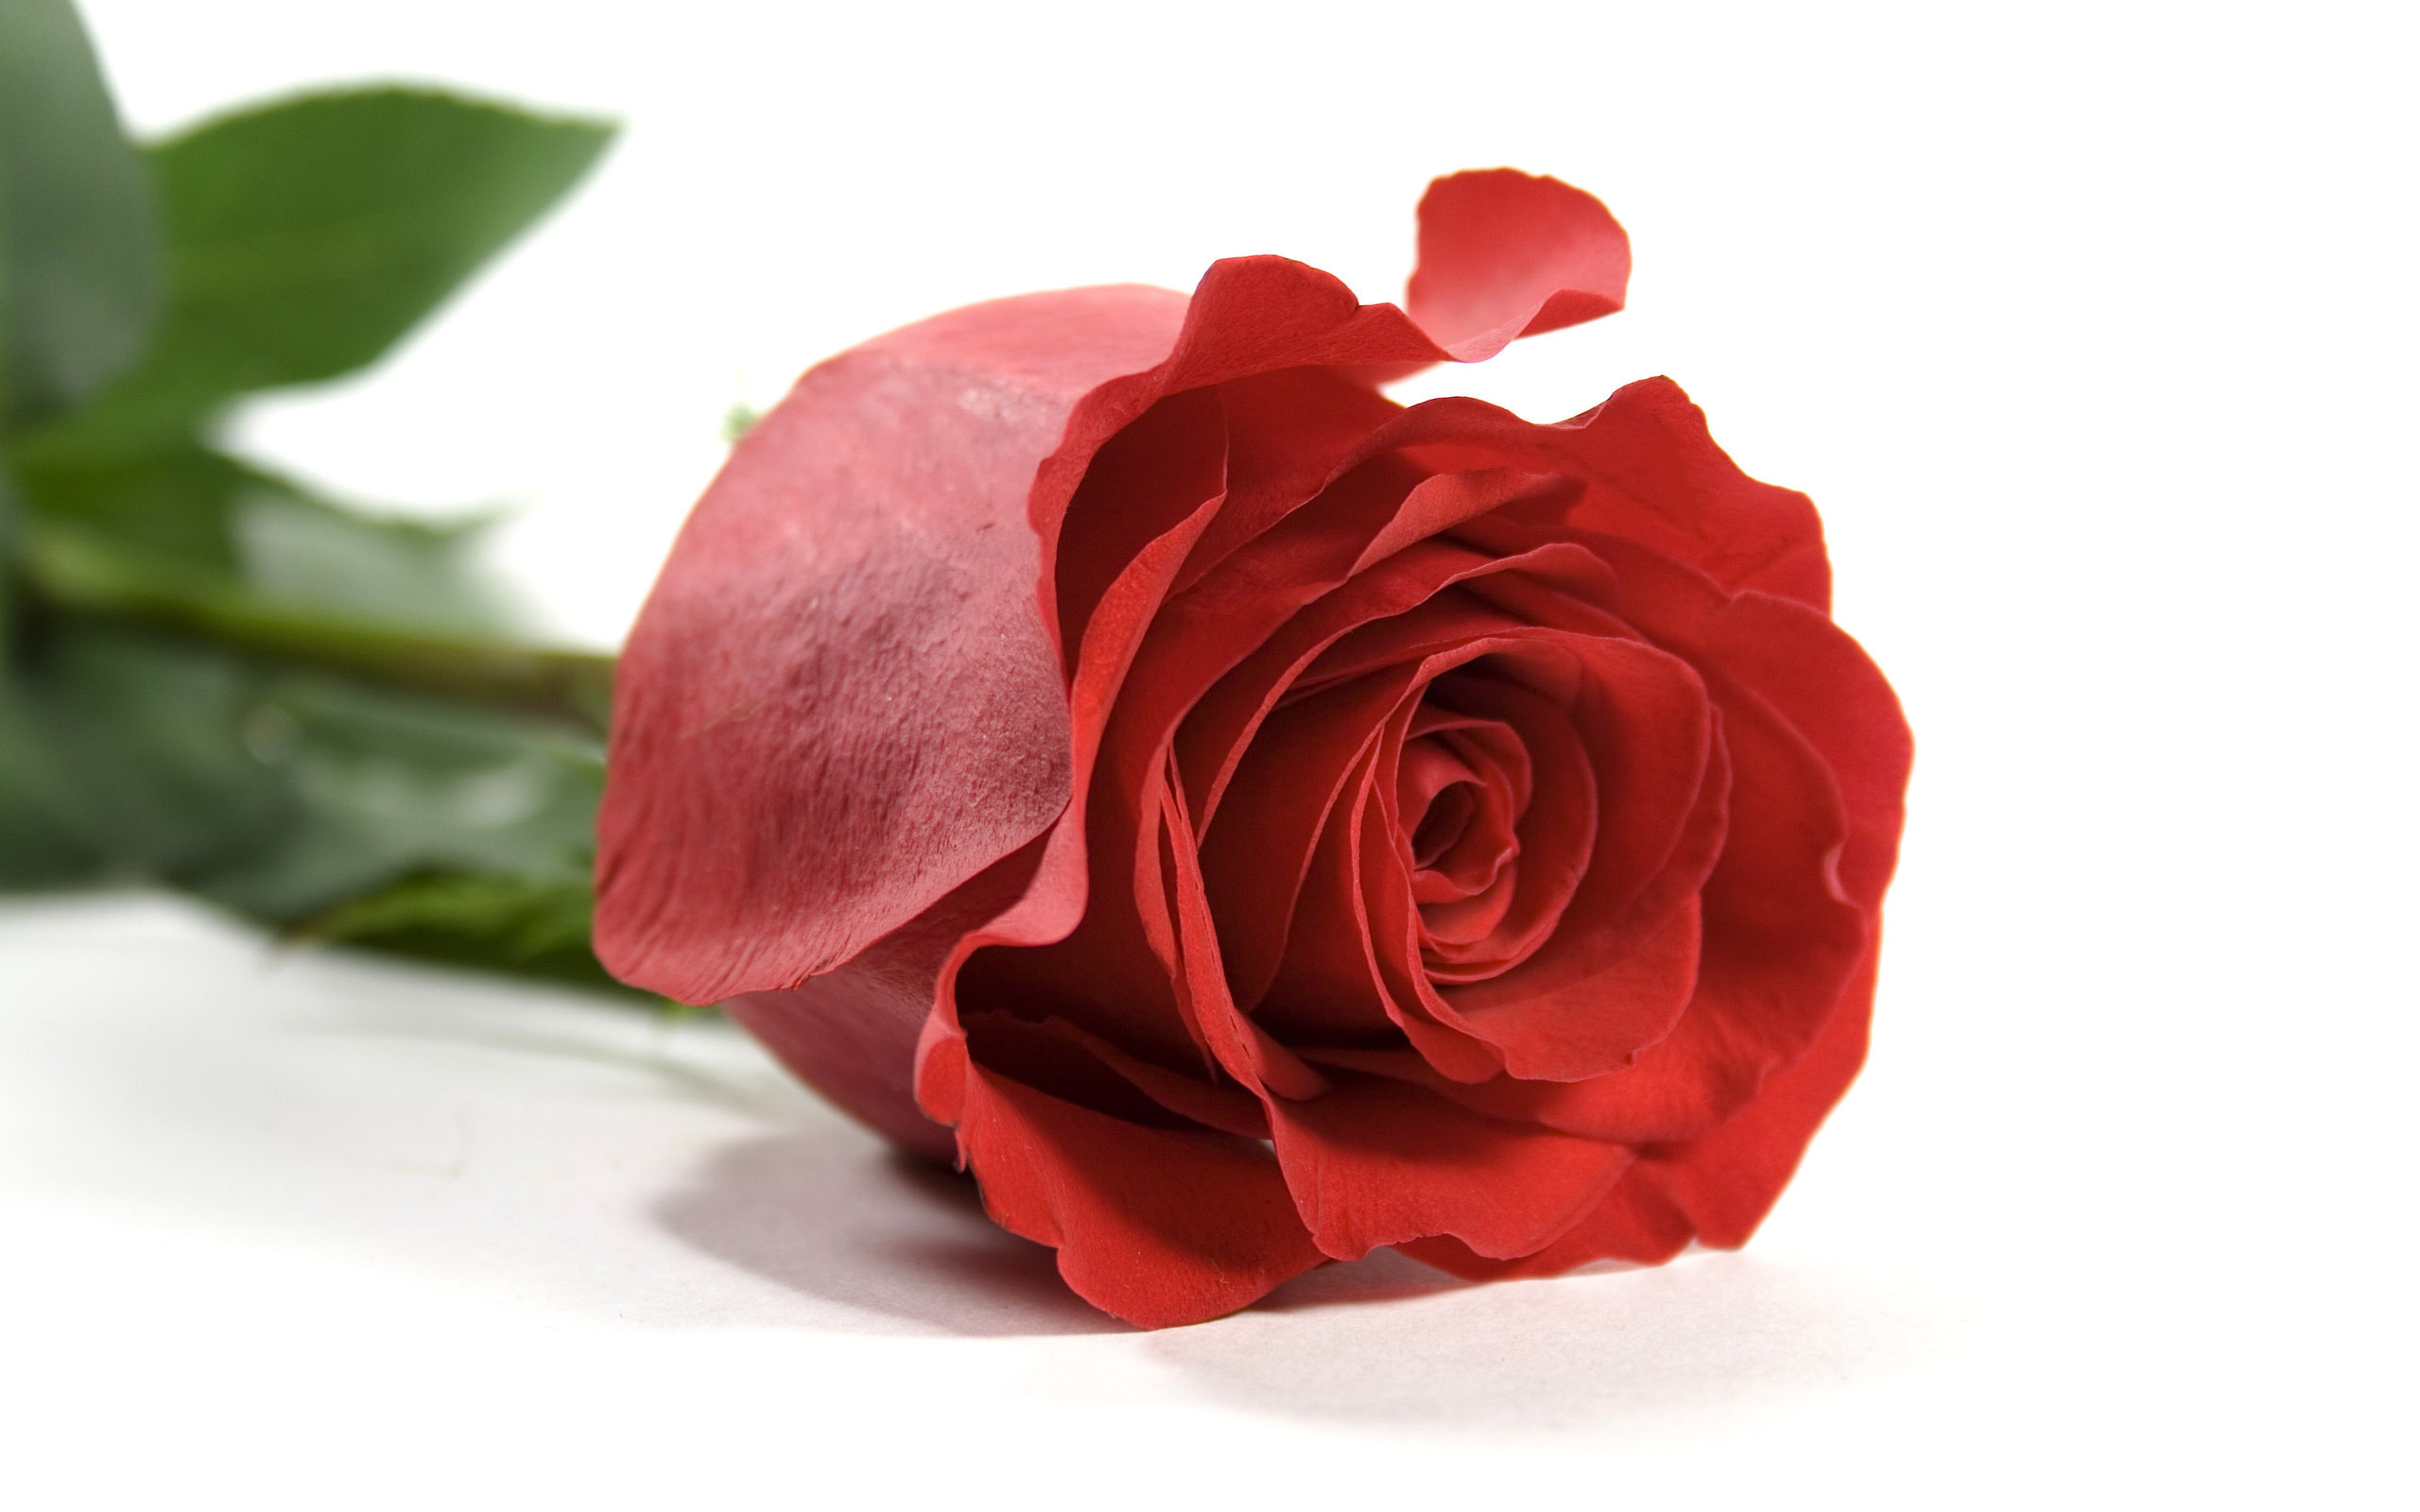 Nature___Flowers_____Red_rose_on_white_background_086598_.jpg